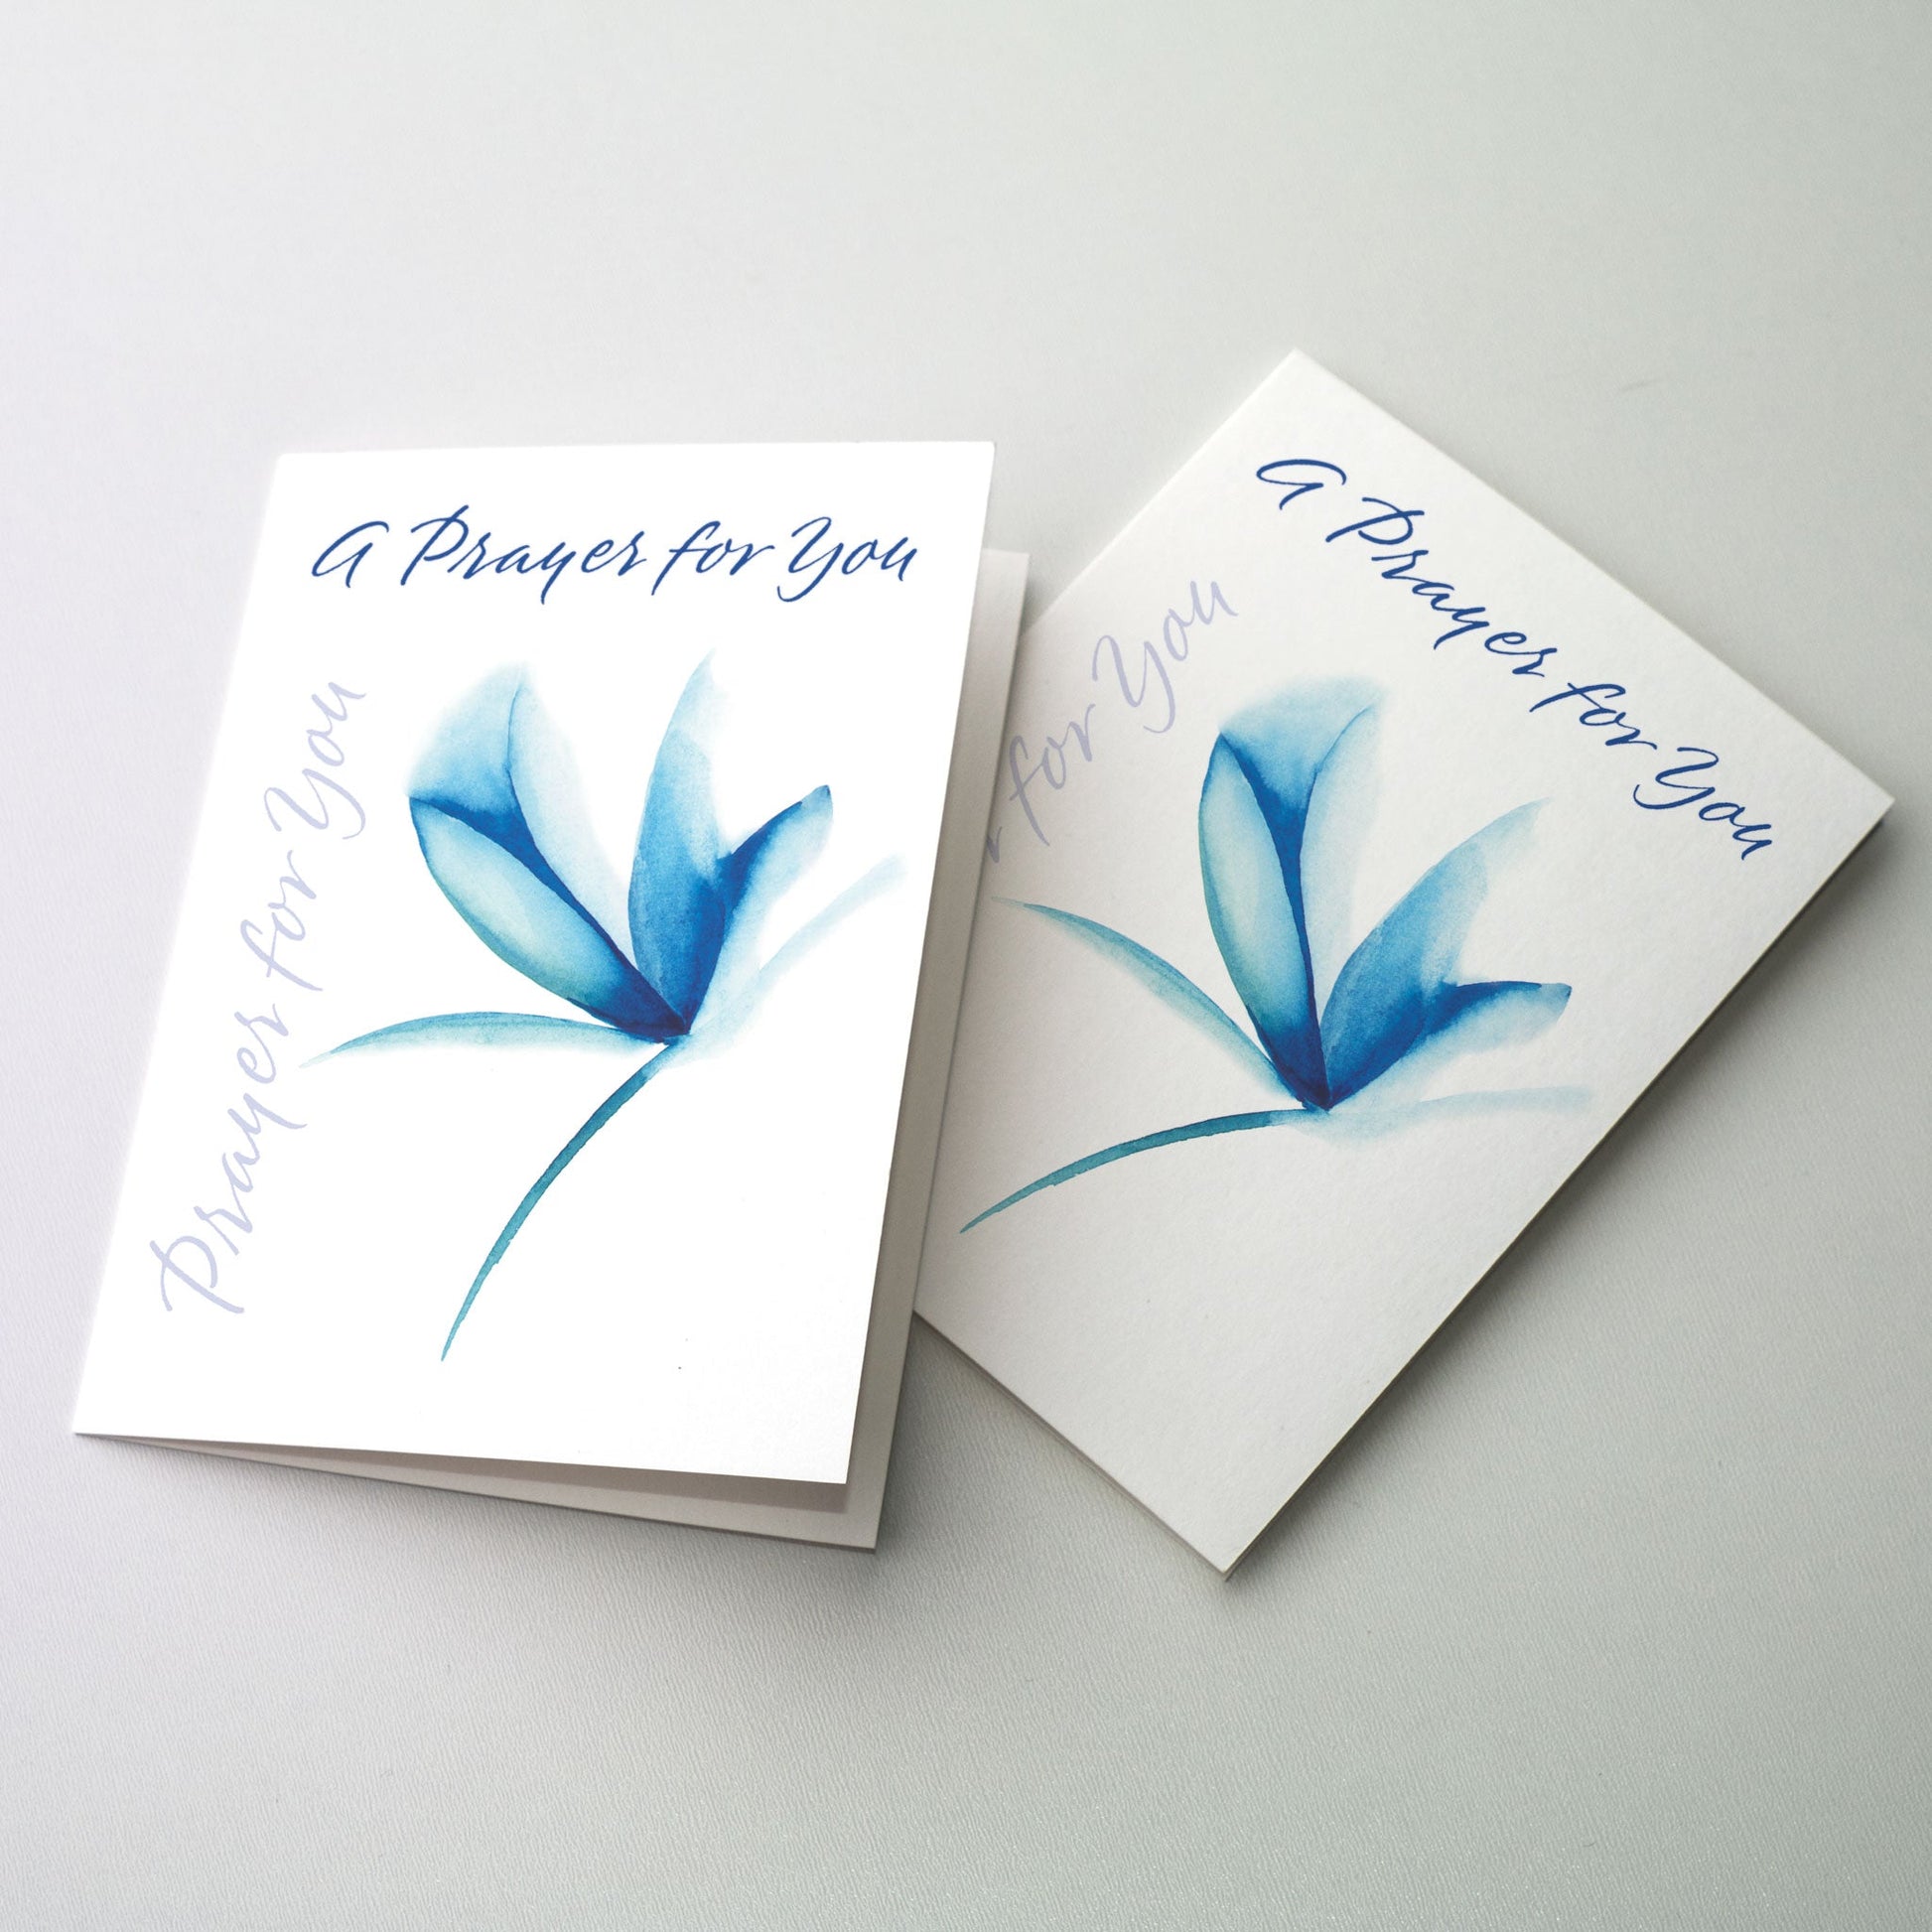 Express your thoughts of concern and prayer in calligraphy accented by a blue flower. The cards measure 5&quot; x 7&quot;. Printed on recycled paper.